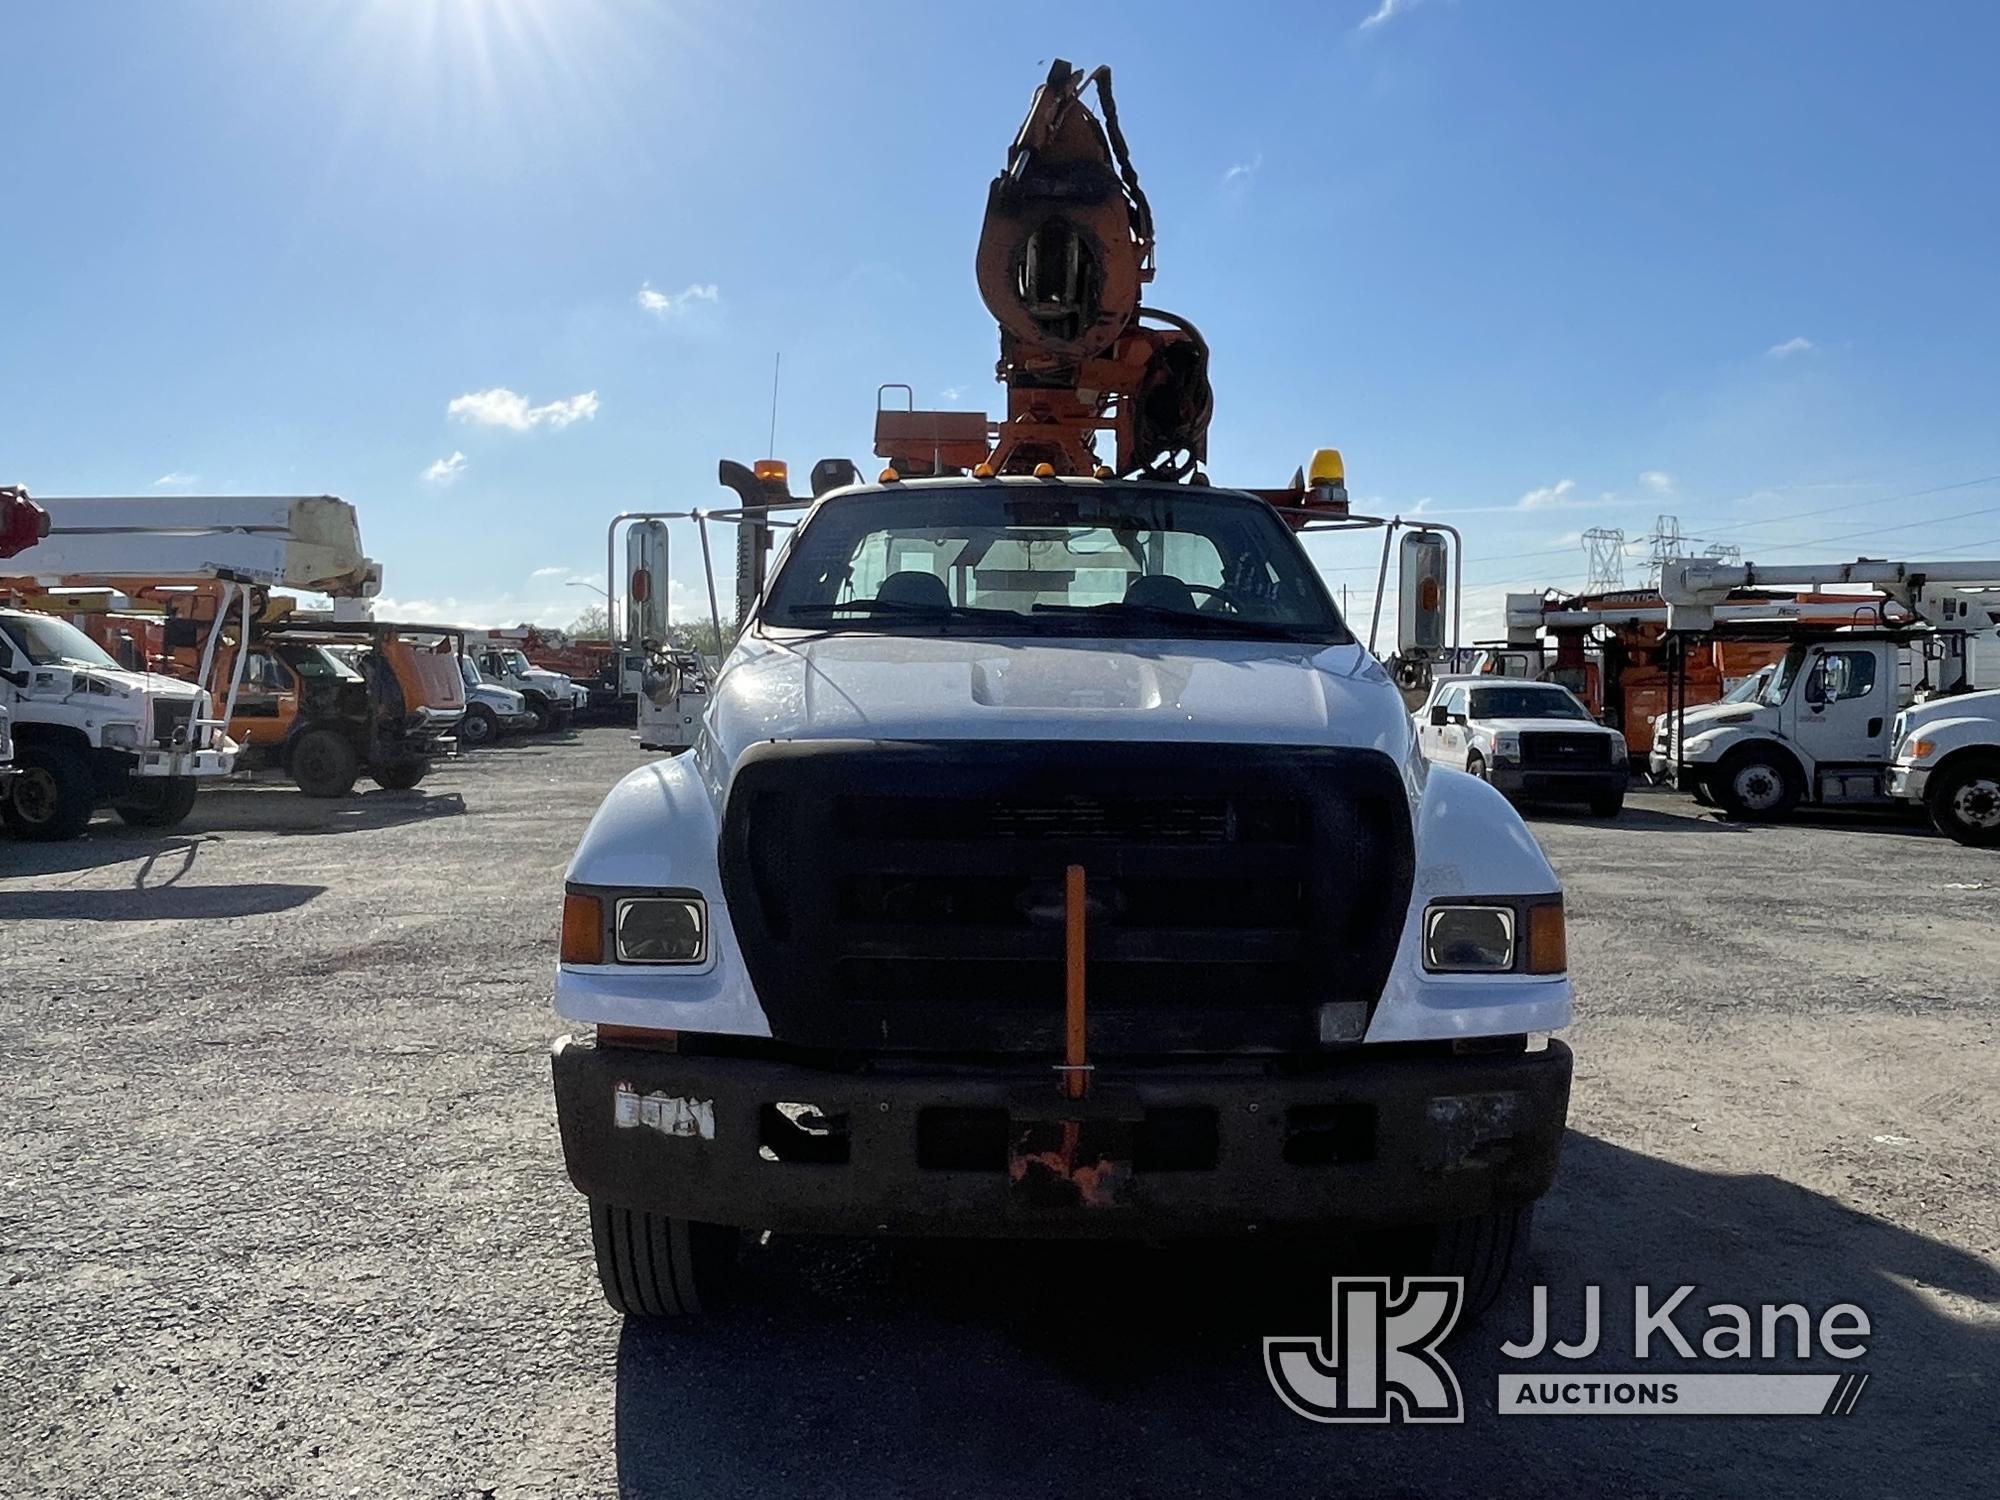 (Plymouth Meeting, PA) Terex/Telelect XL4045, Digger Derrick rear mounted on 2006 Ford F750 Flatbed/